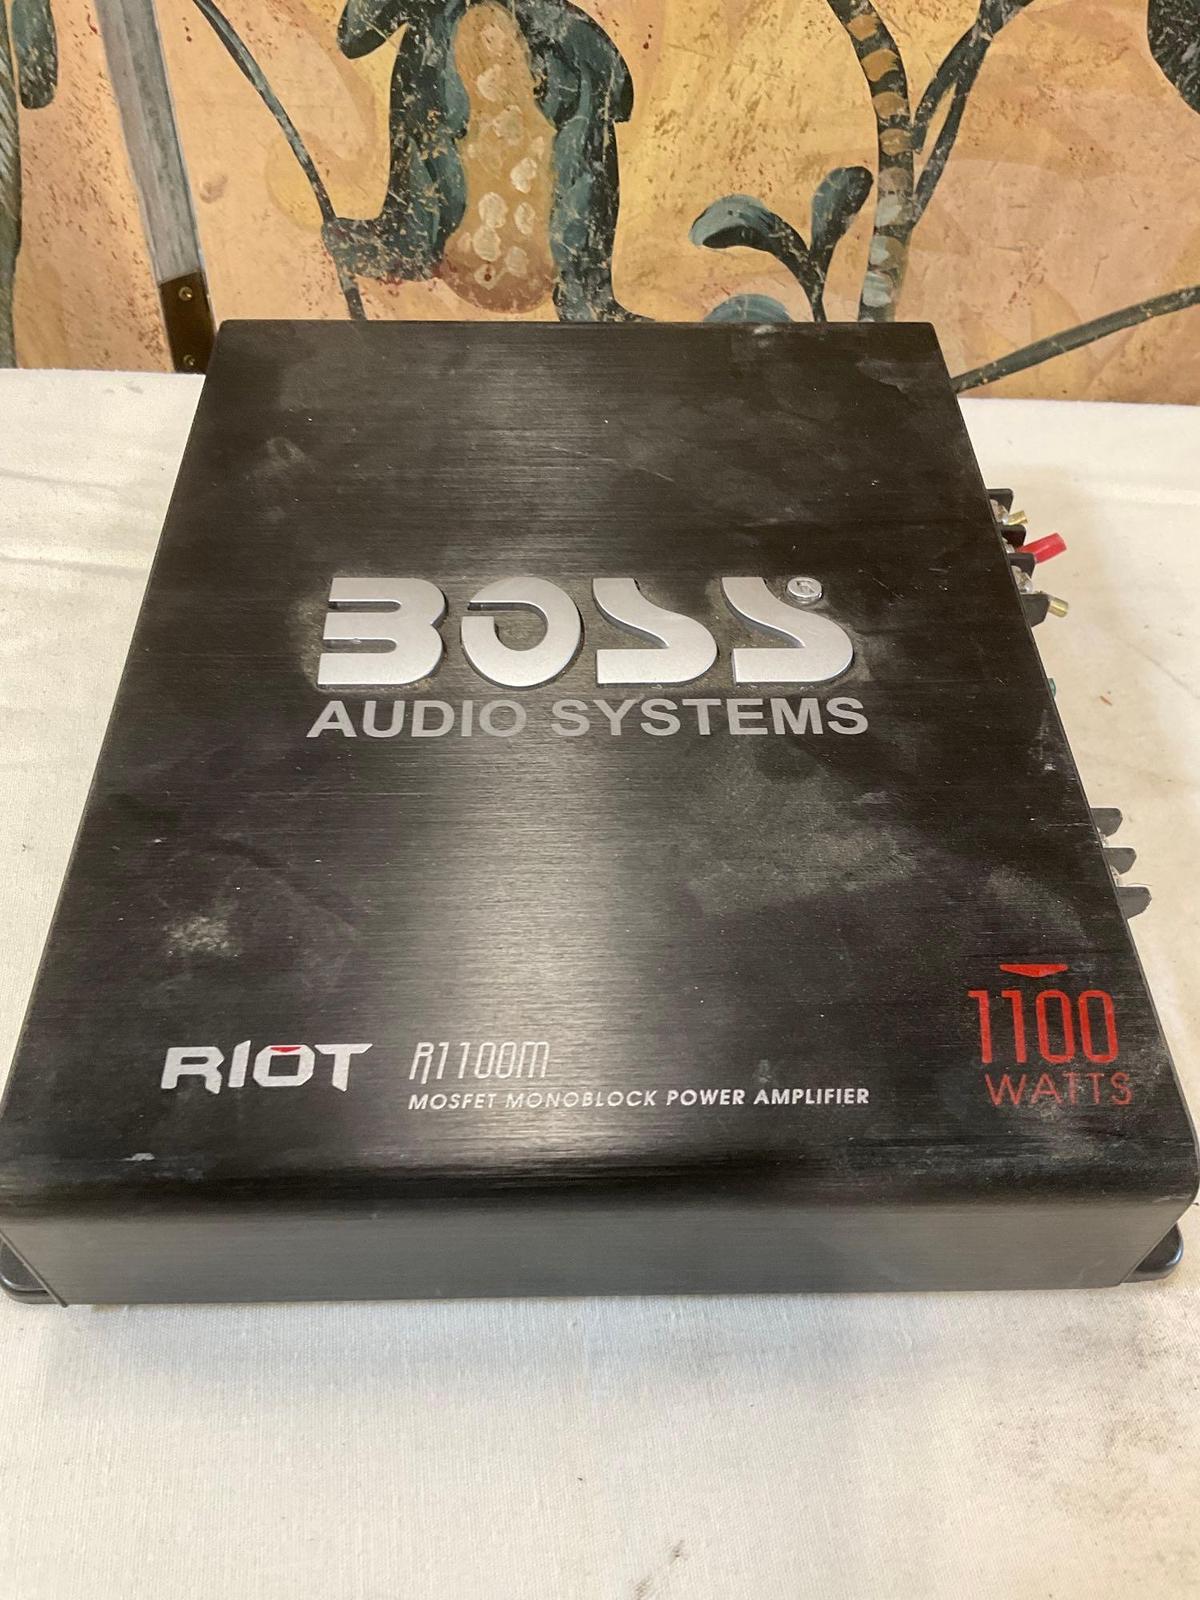 Boss Audio Systems Riot R1100M amplifier